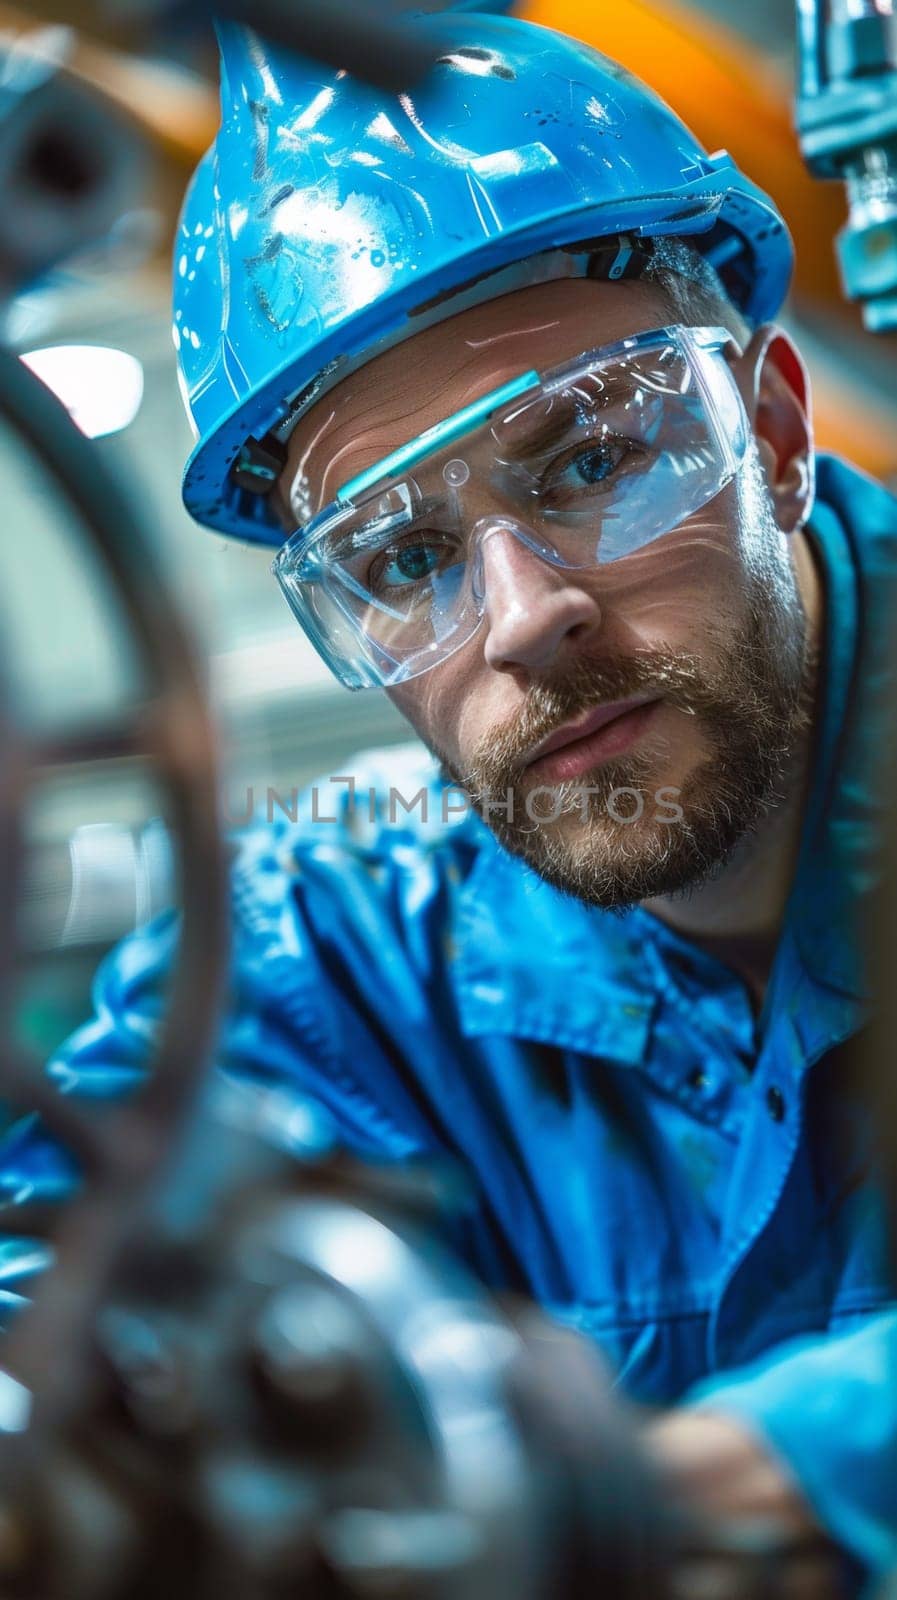 A man in blue hard hat and safety glasses working on machinery